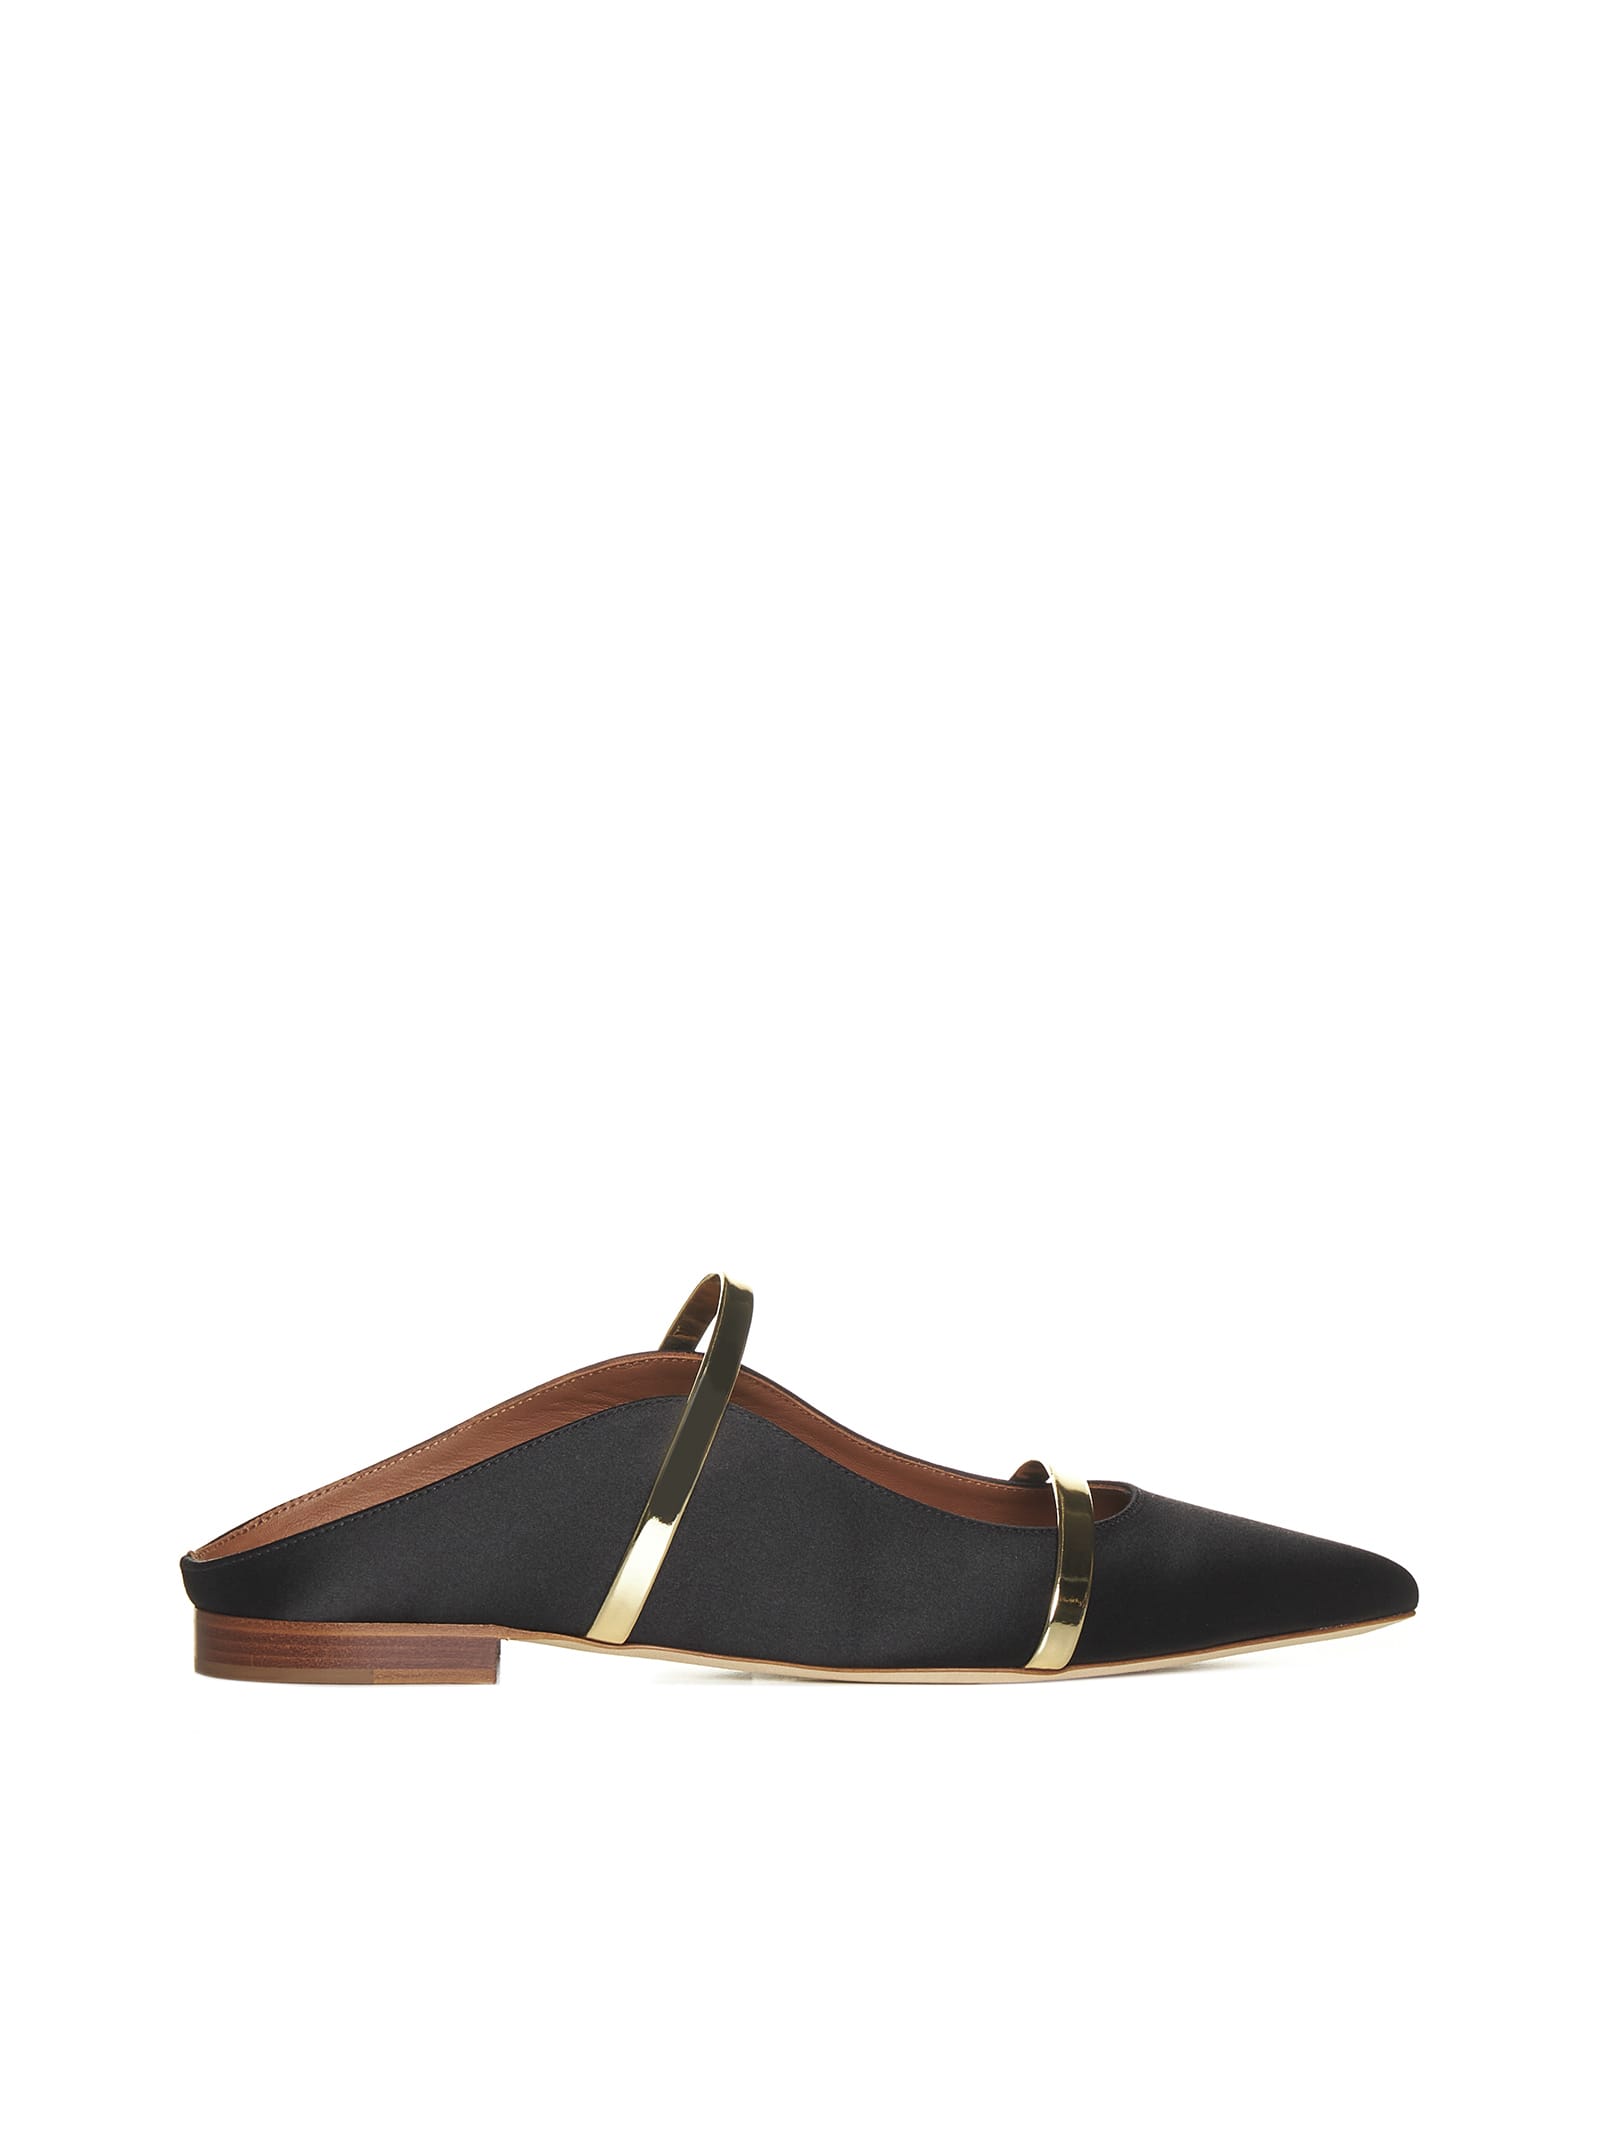 Malone Souliers Flat Shoes In Black/gold